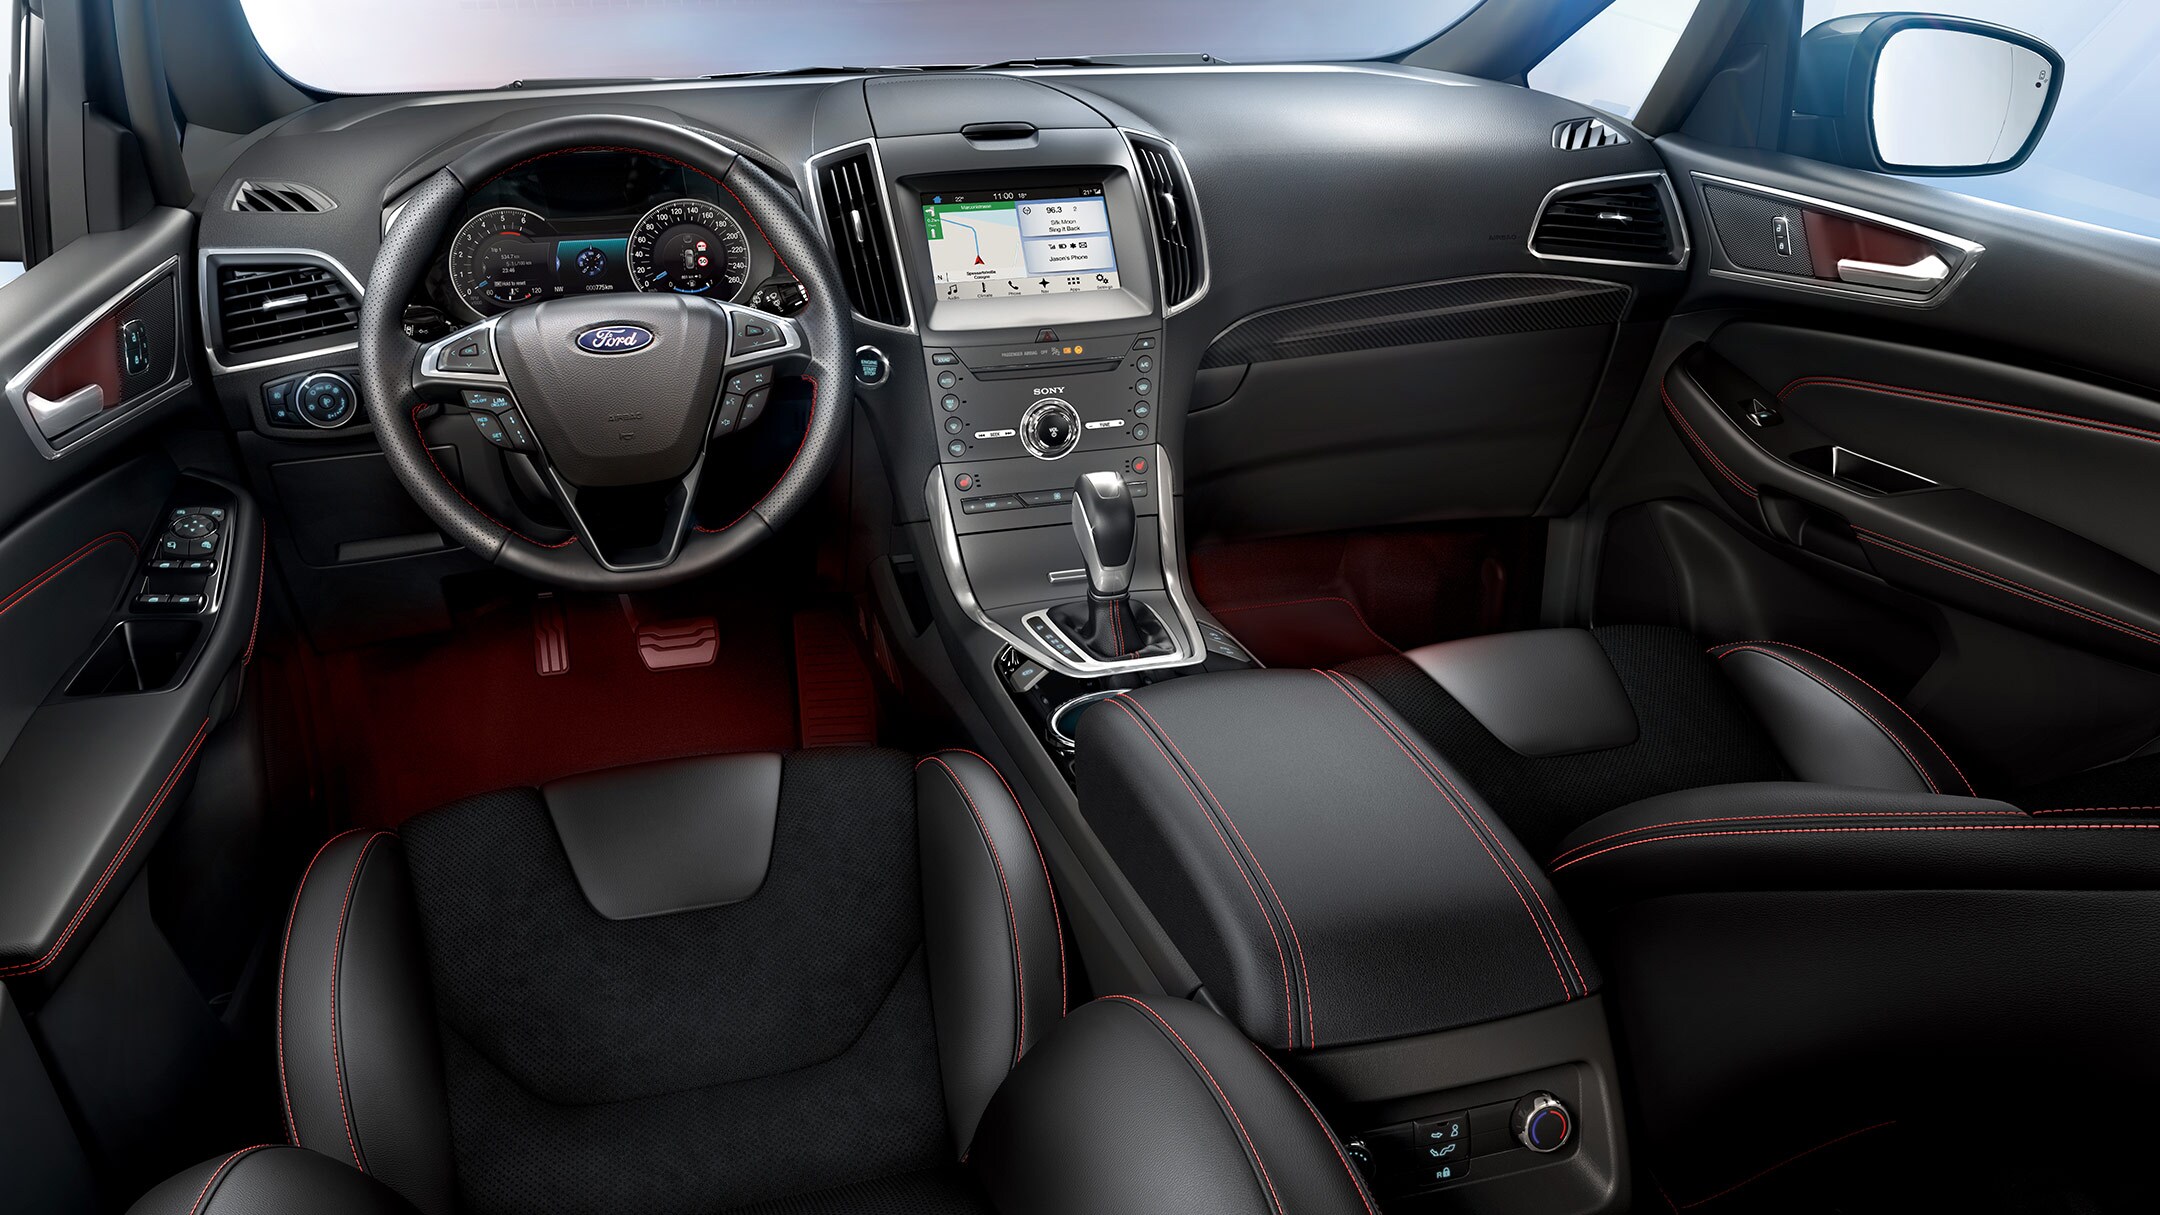 Ford S-MAX ST-Line interior with SYNC 3